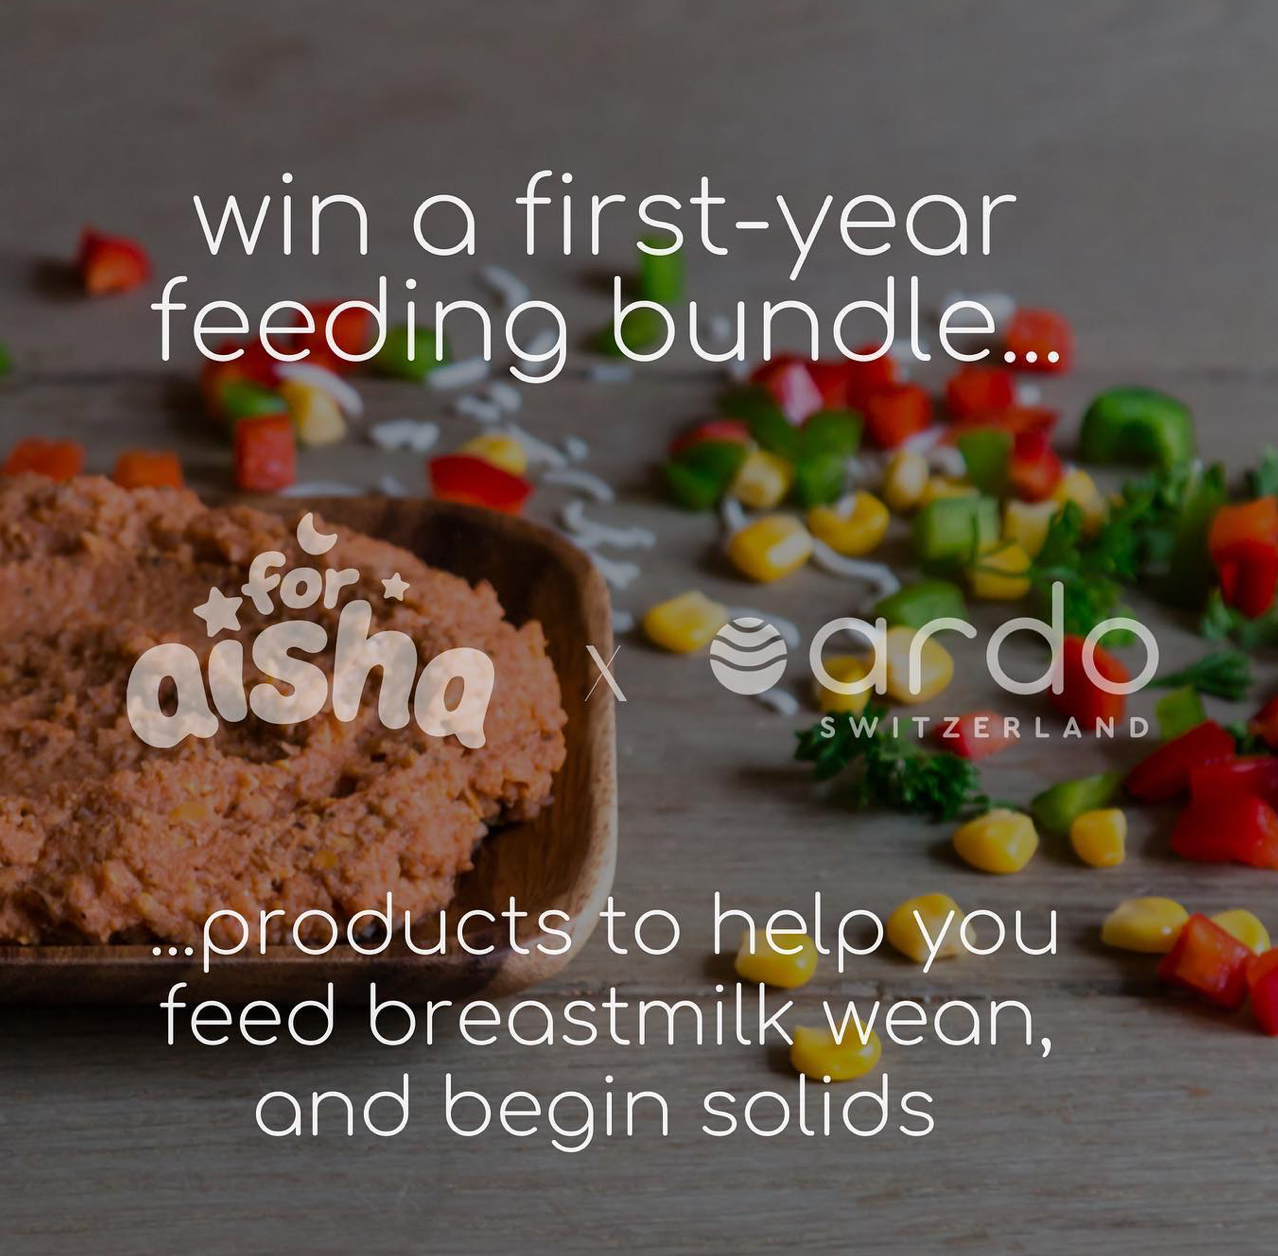 For Aisha partners with Ardo to give away a first-year feeding bundle worth over £300!